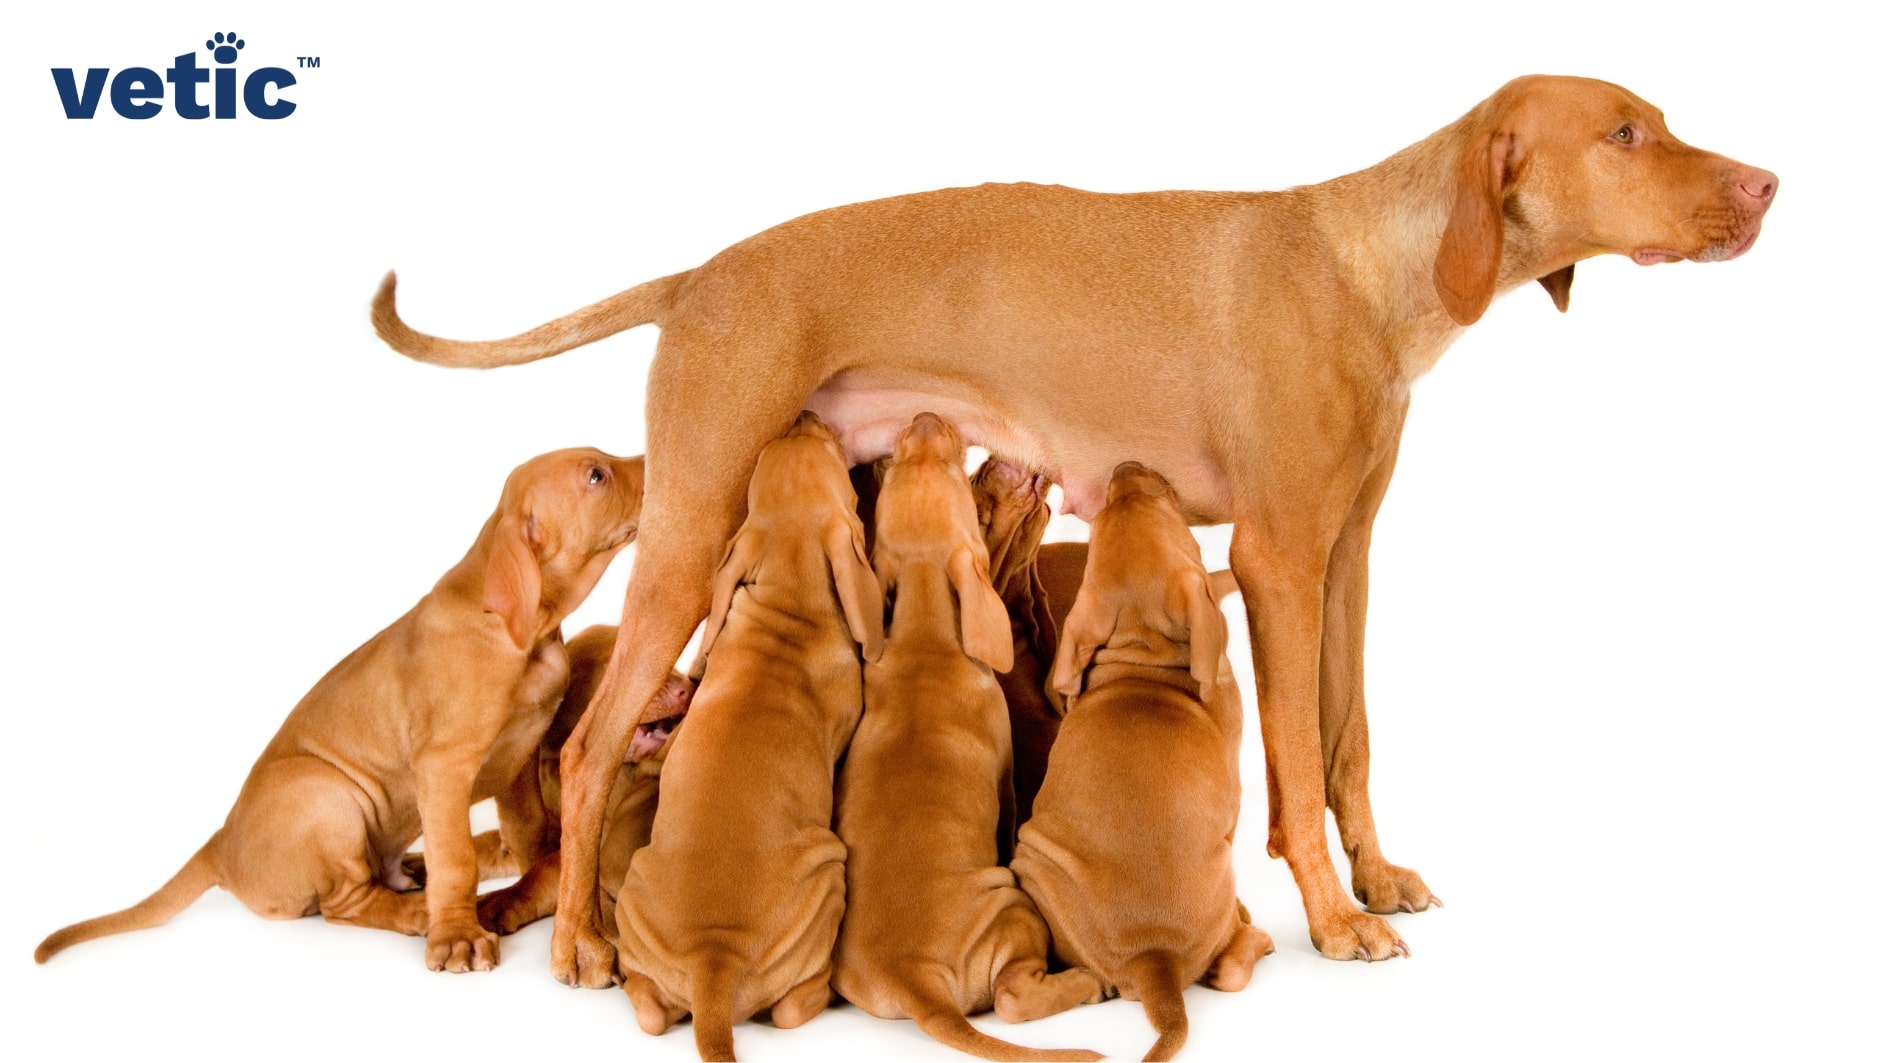 Mother dog, reddish brown in colour, of medium large breed, feeding her seven puppies while standing. Roundworms in dogs can be transmitted from mom to pups through breastfeeding.